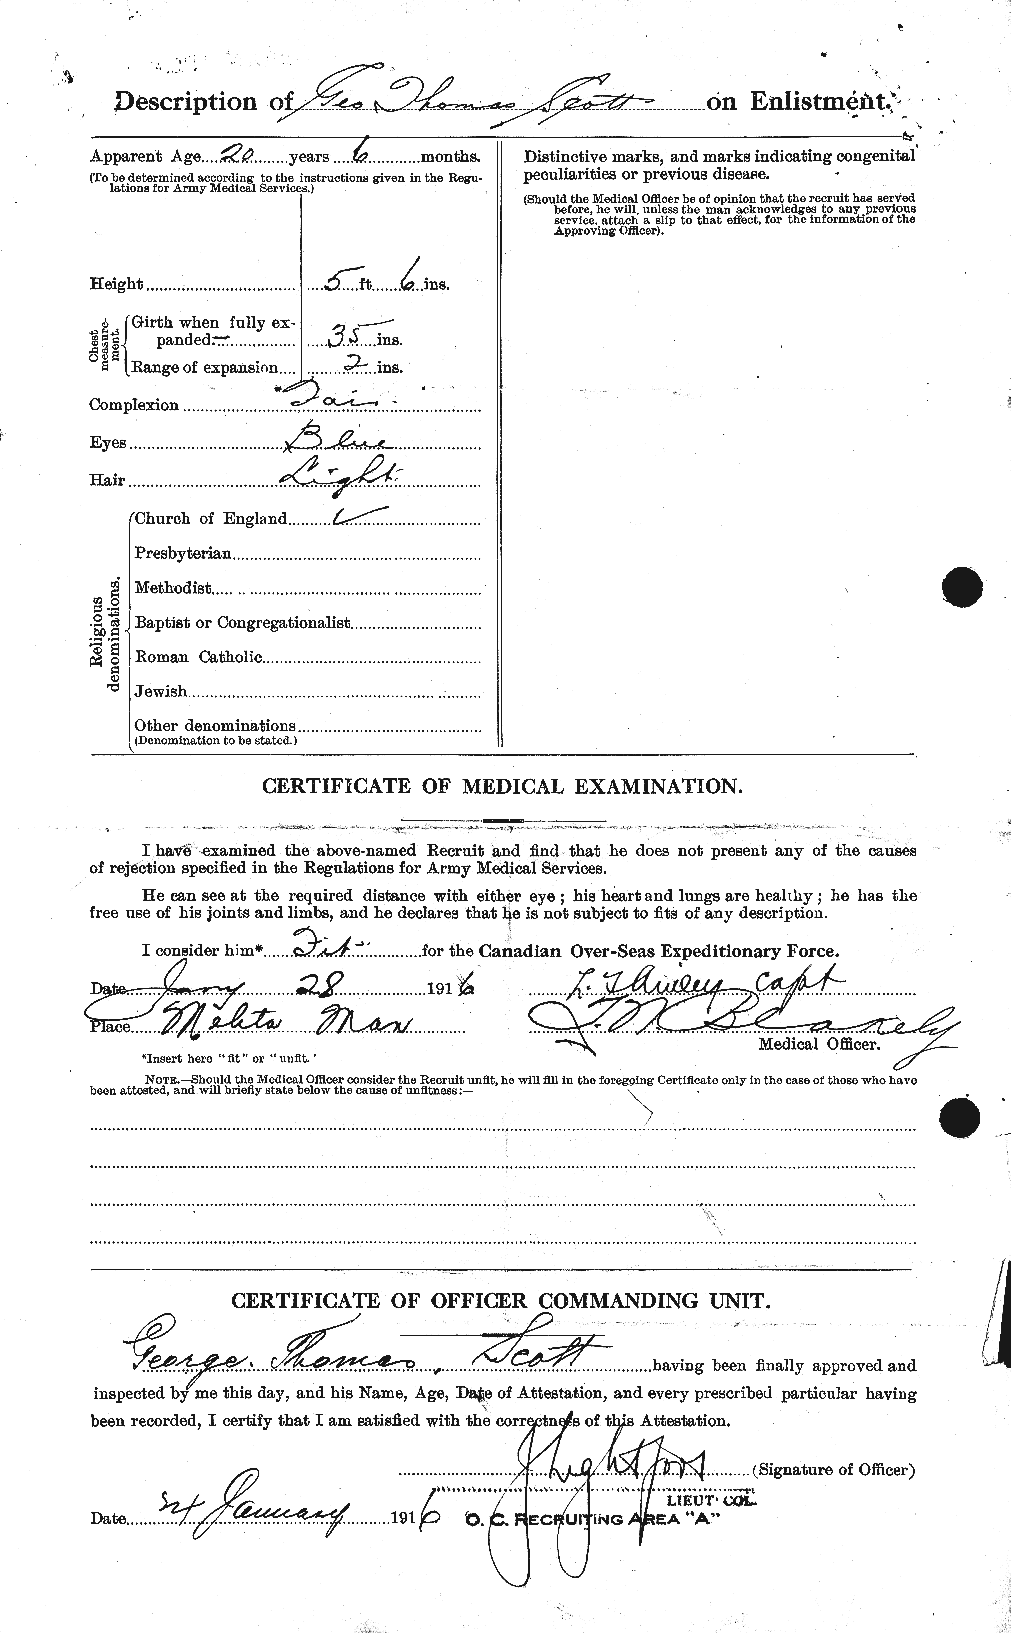 Personnel Records of the First World War - CEF 083142b